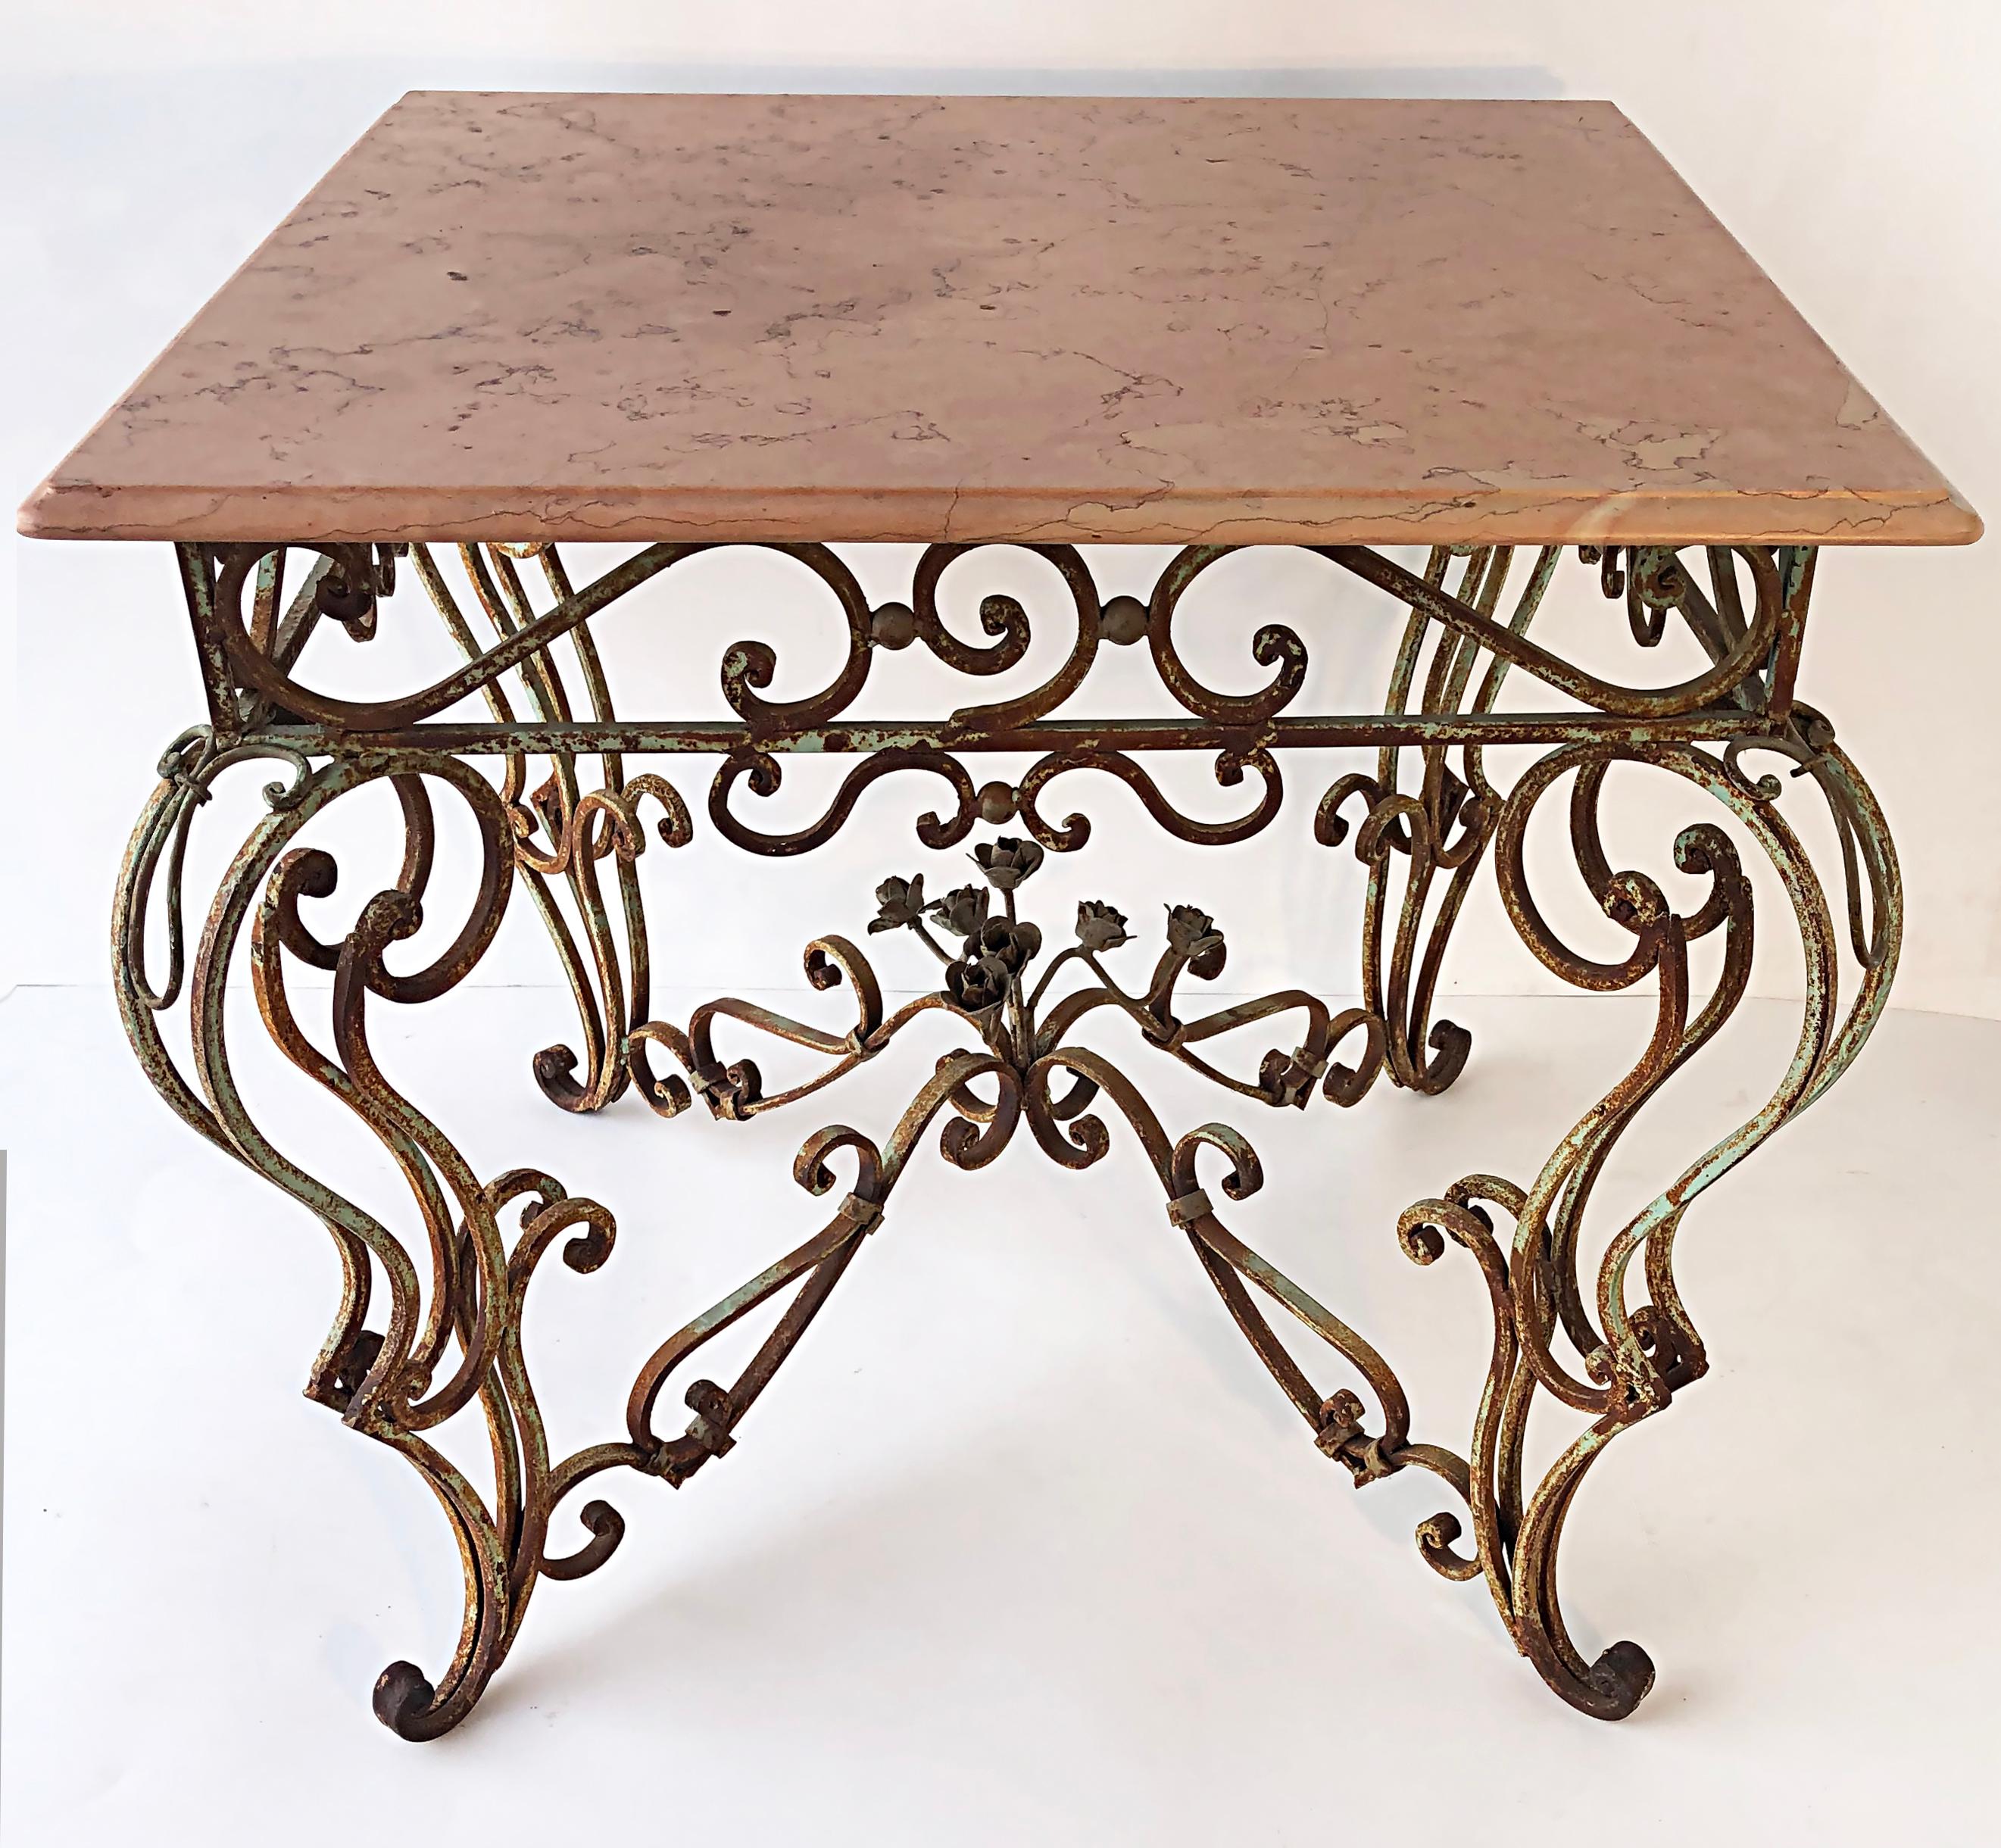 Vintage Wrought Iron Marble Top Garden Table with Scrollwork and Flowers In Good Condition For Sale In Miami, FL